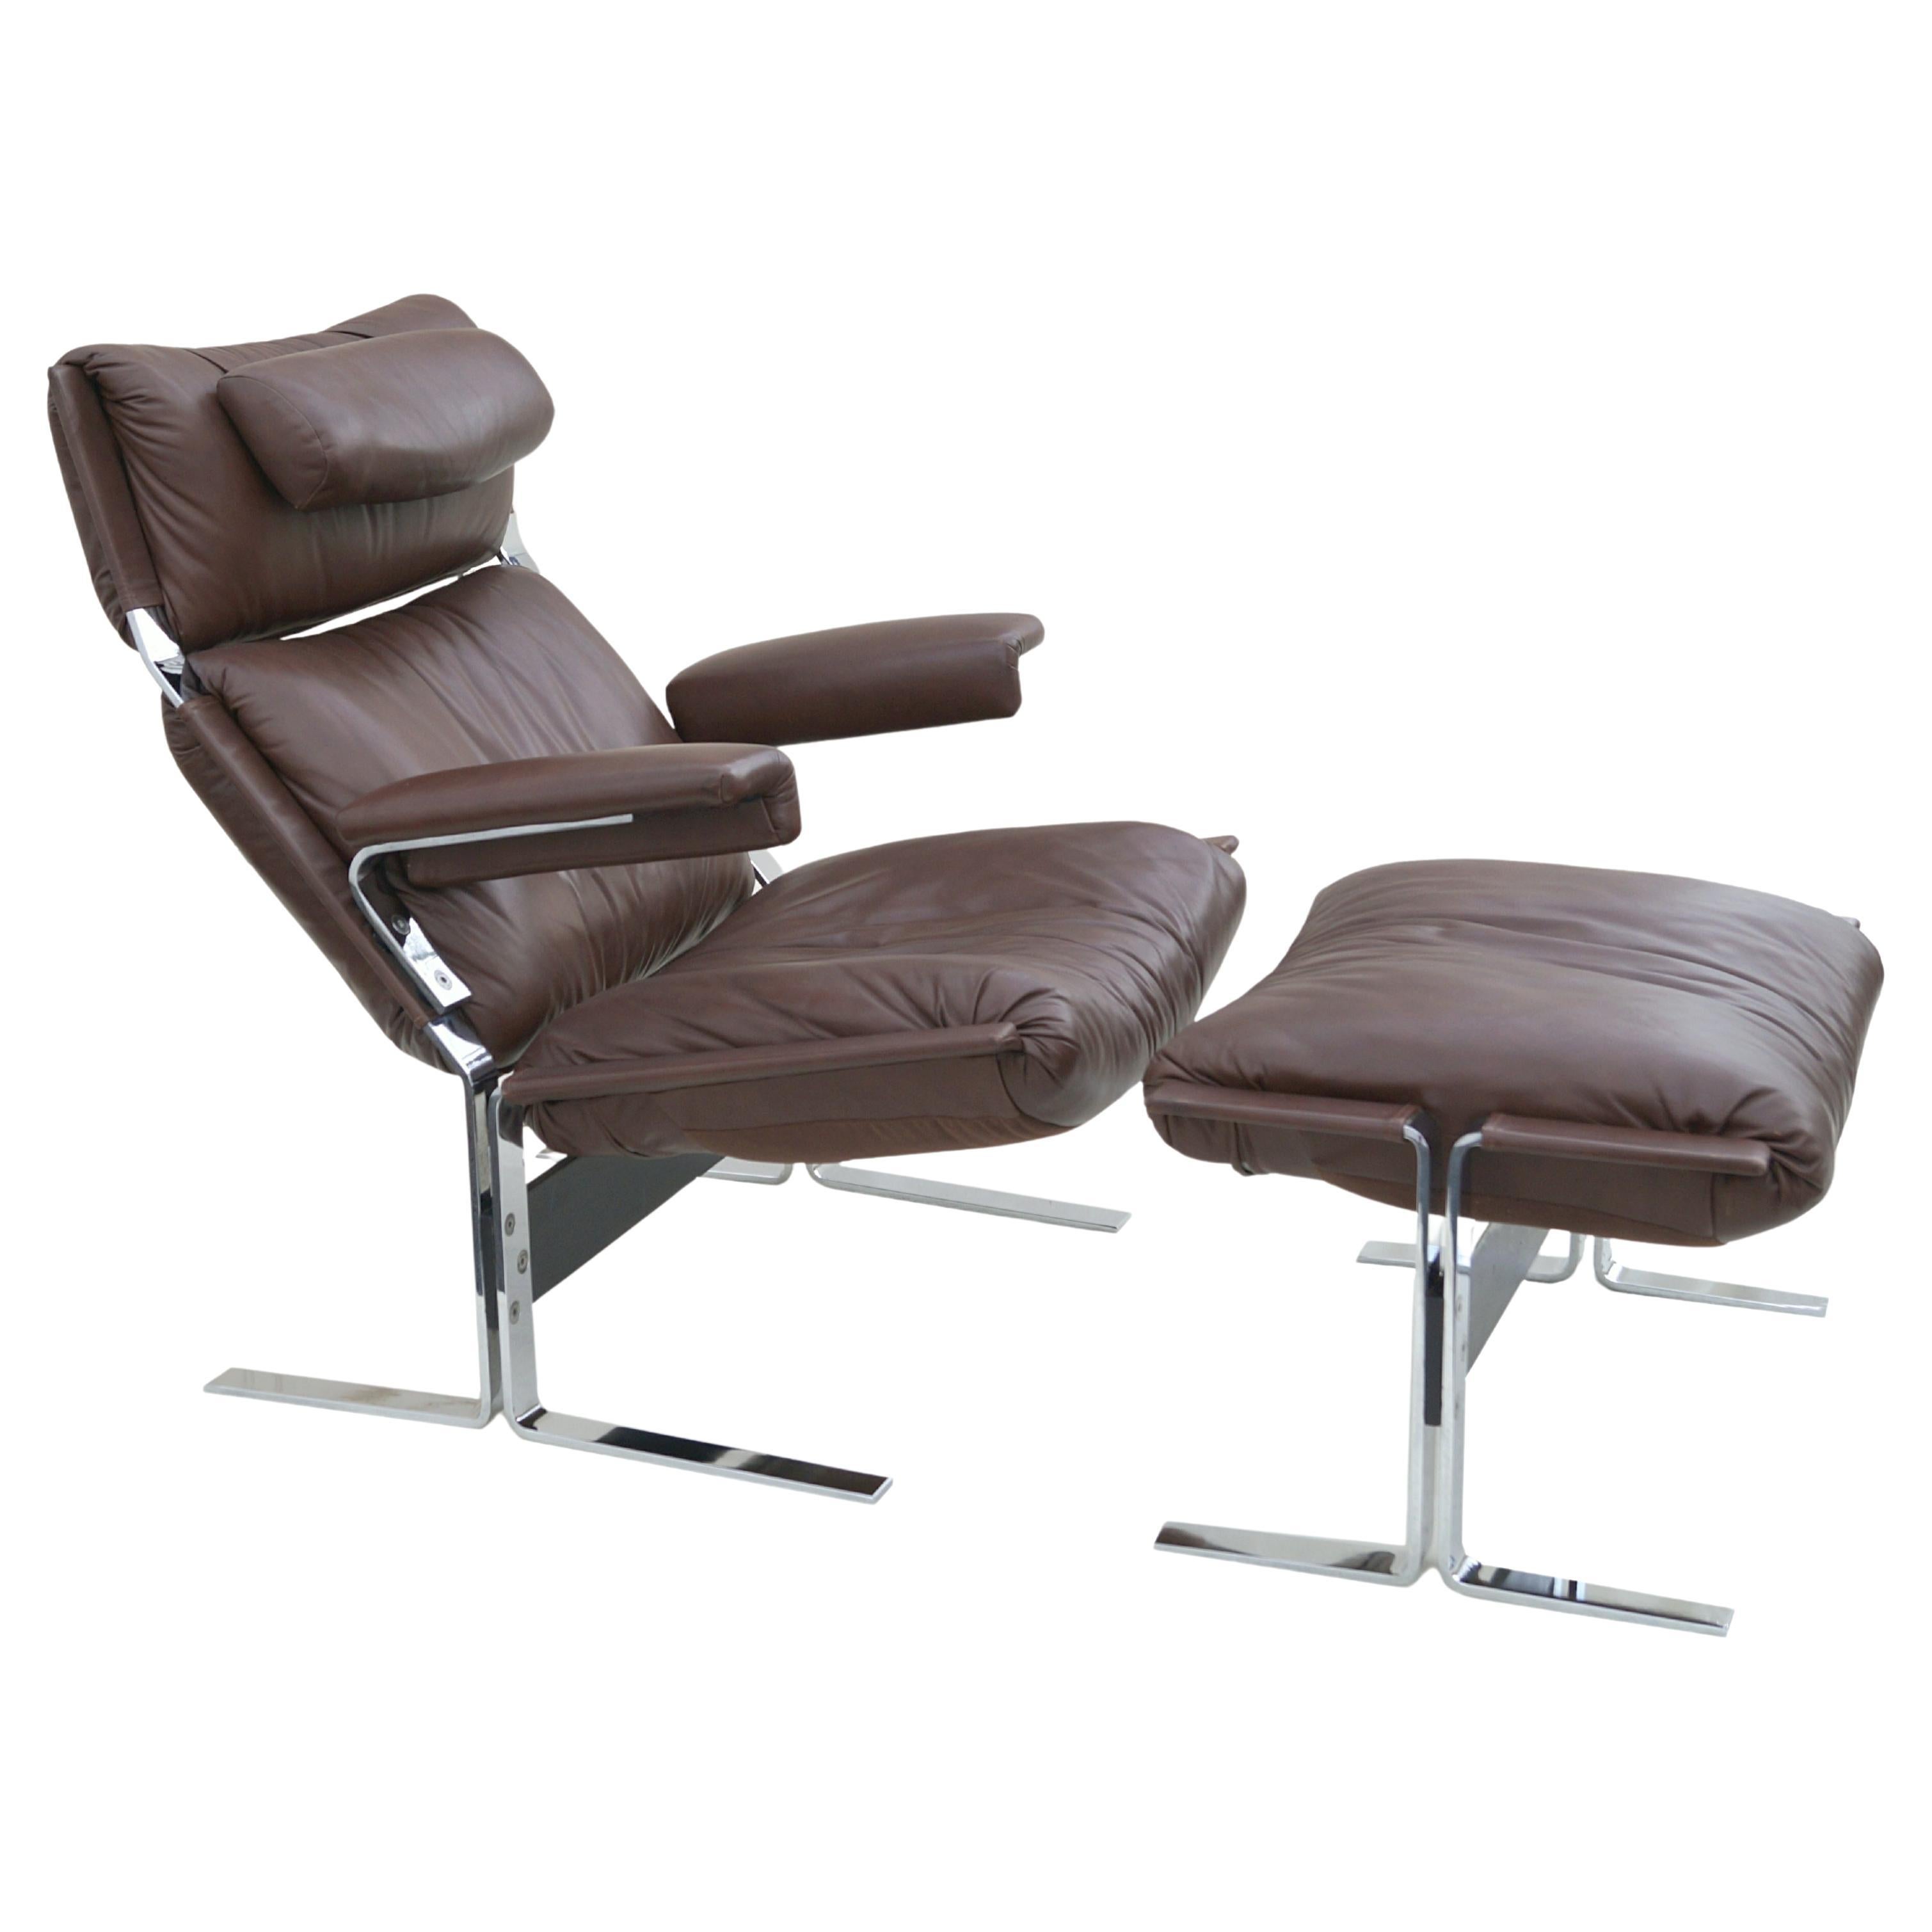 Richard Hersberger for Pace Brown Leather & Chrome Lounge Chair and Ottoman